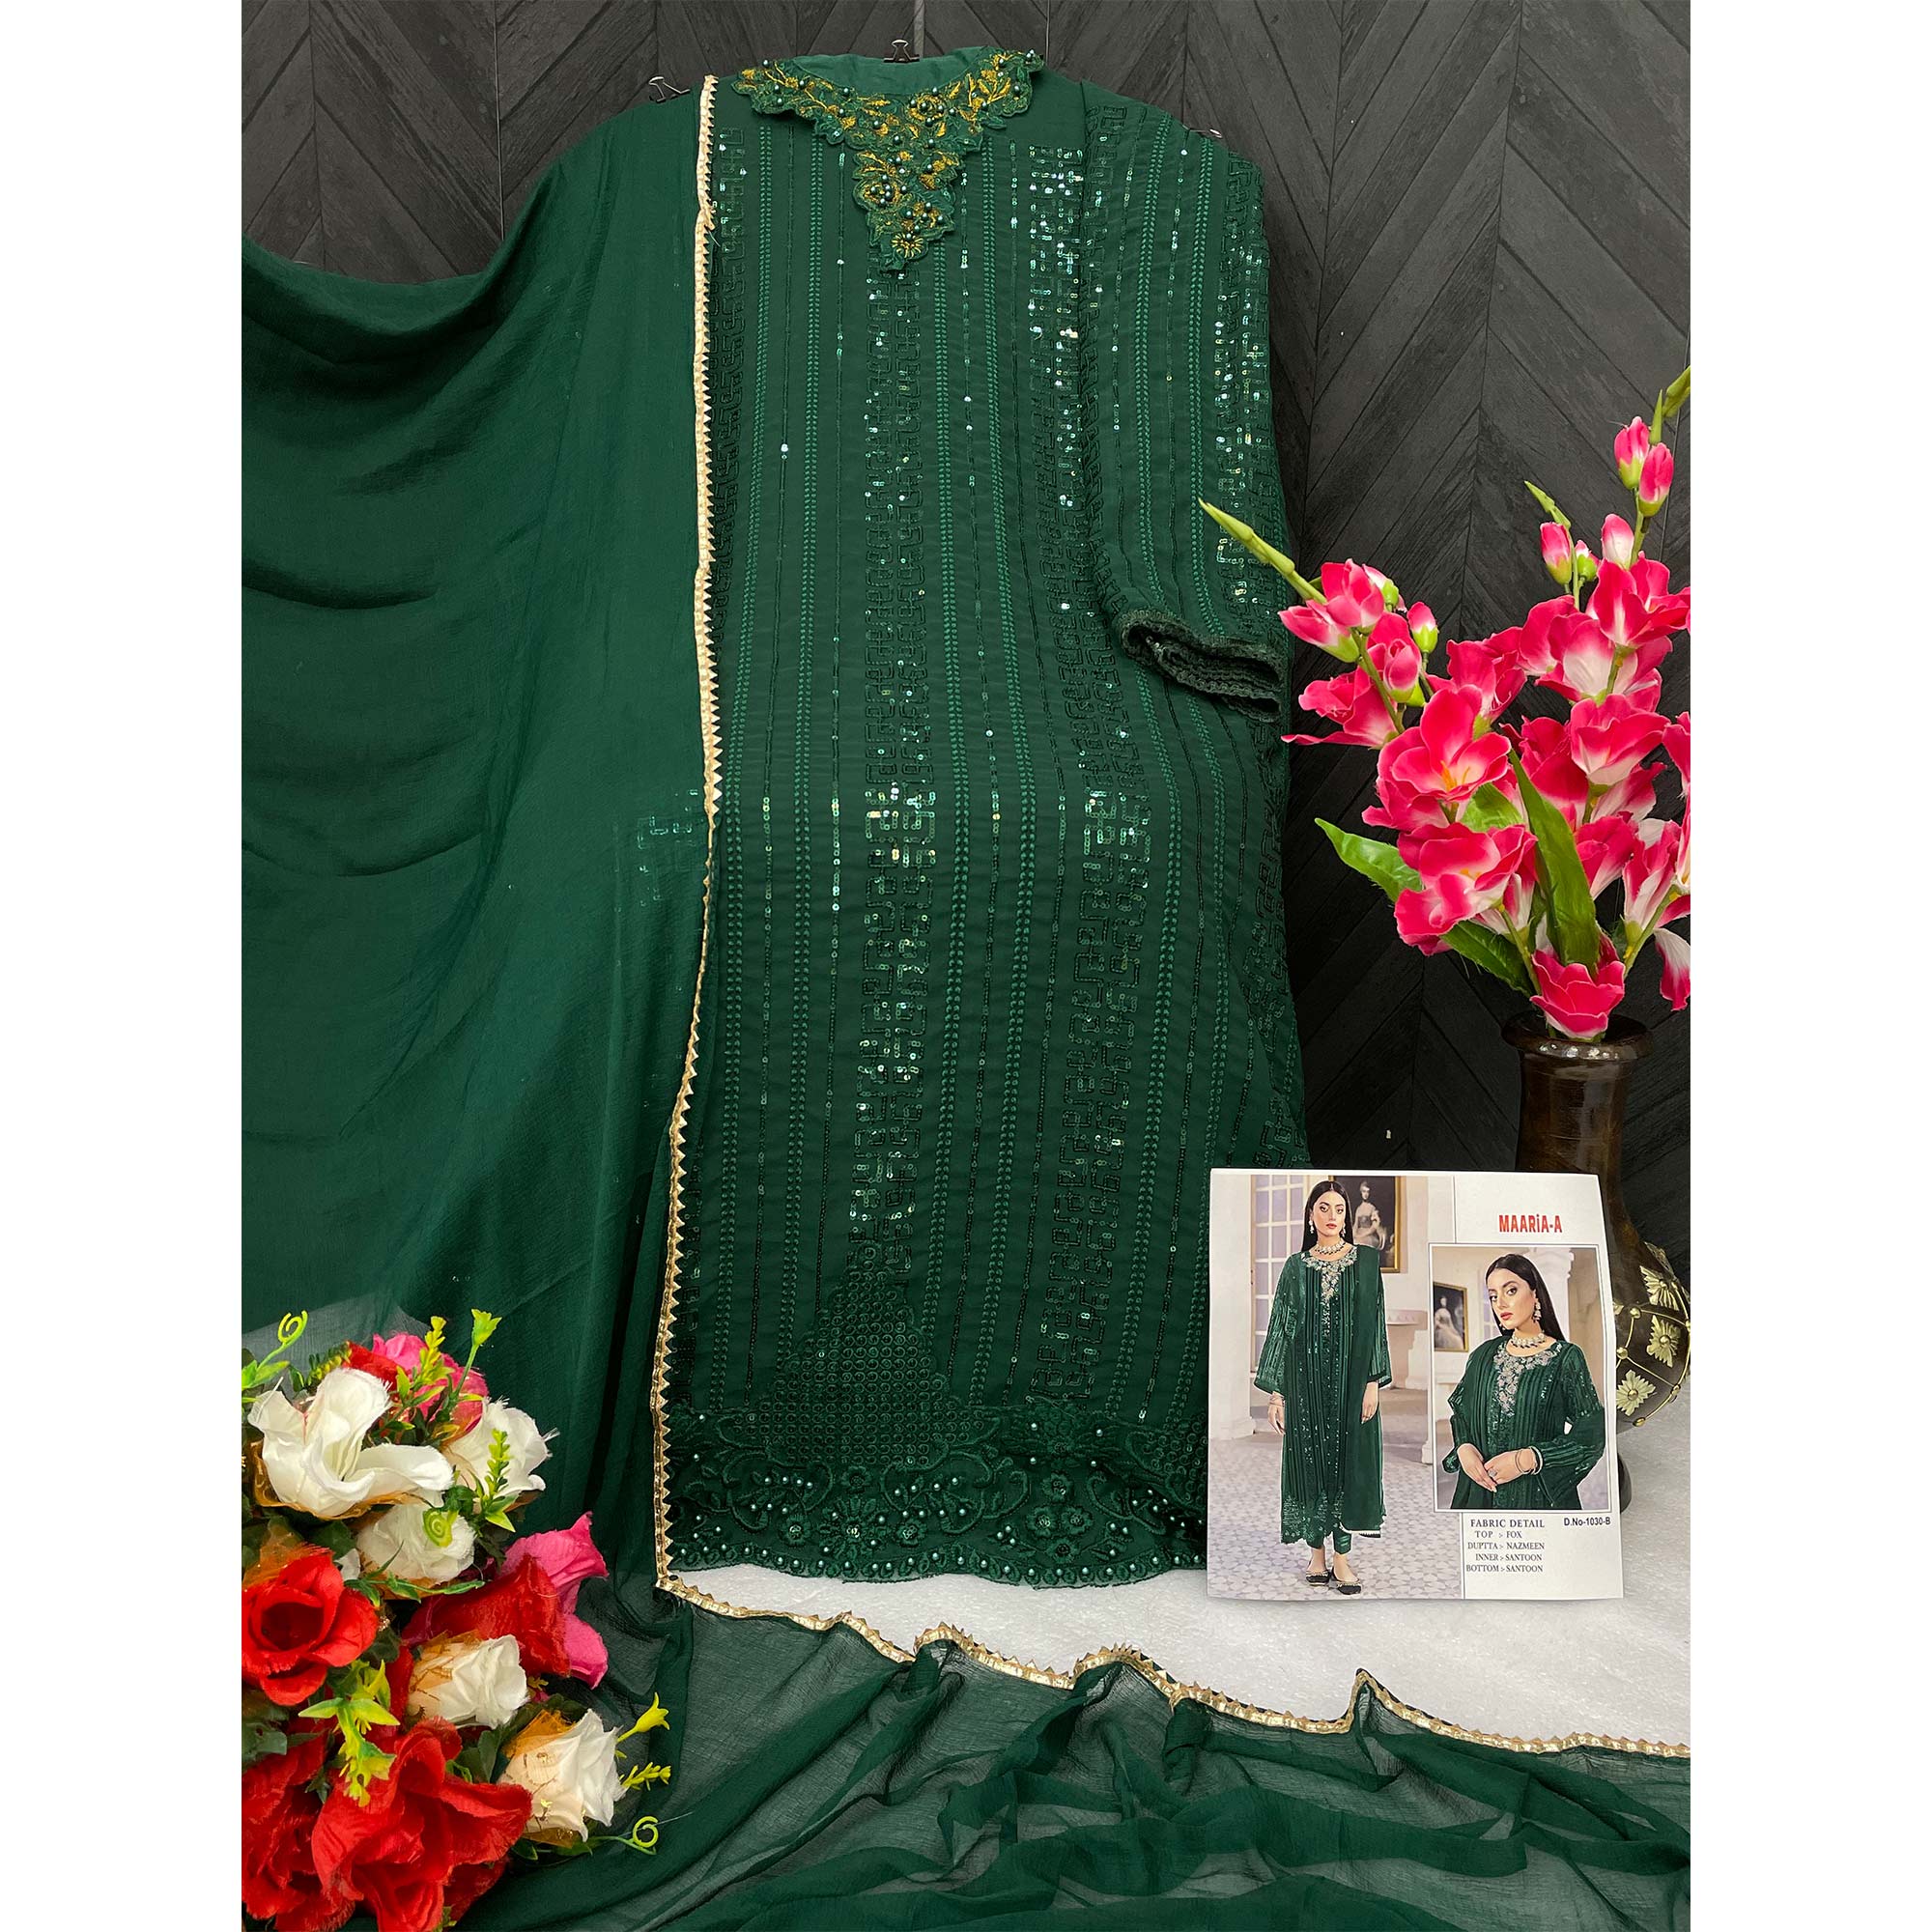 Green Sequins Embroidered Georgette Pakistani Suit